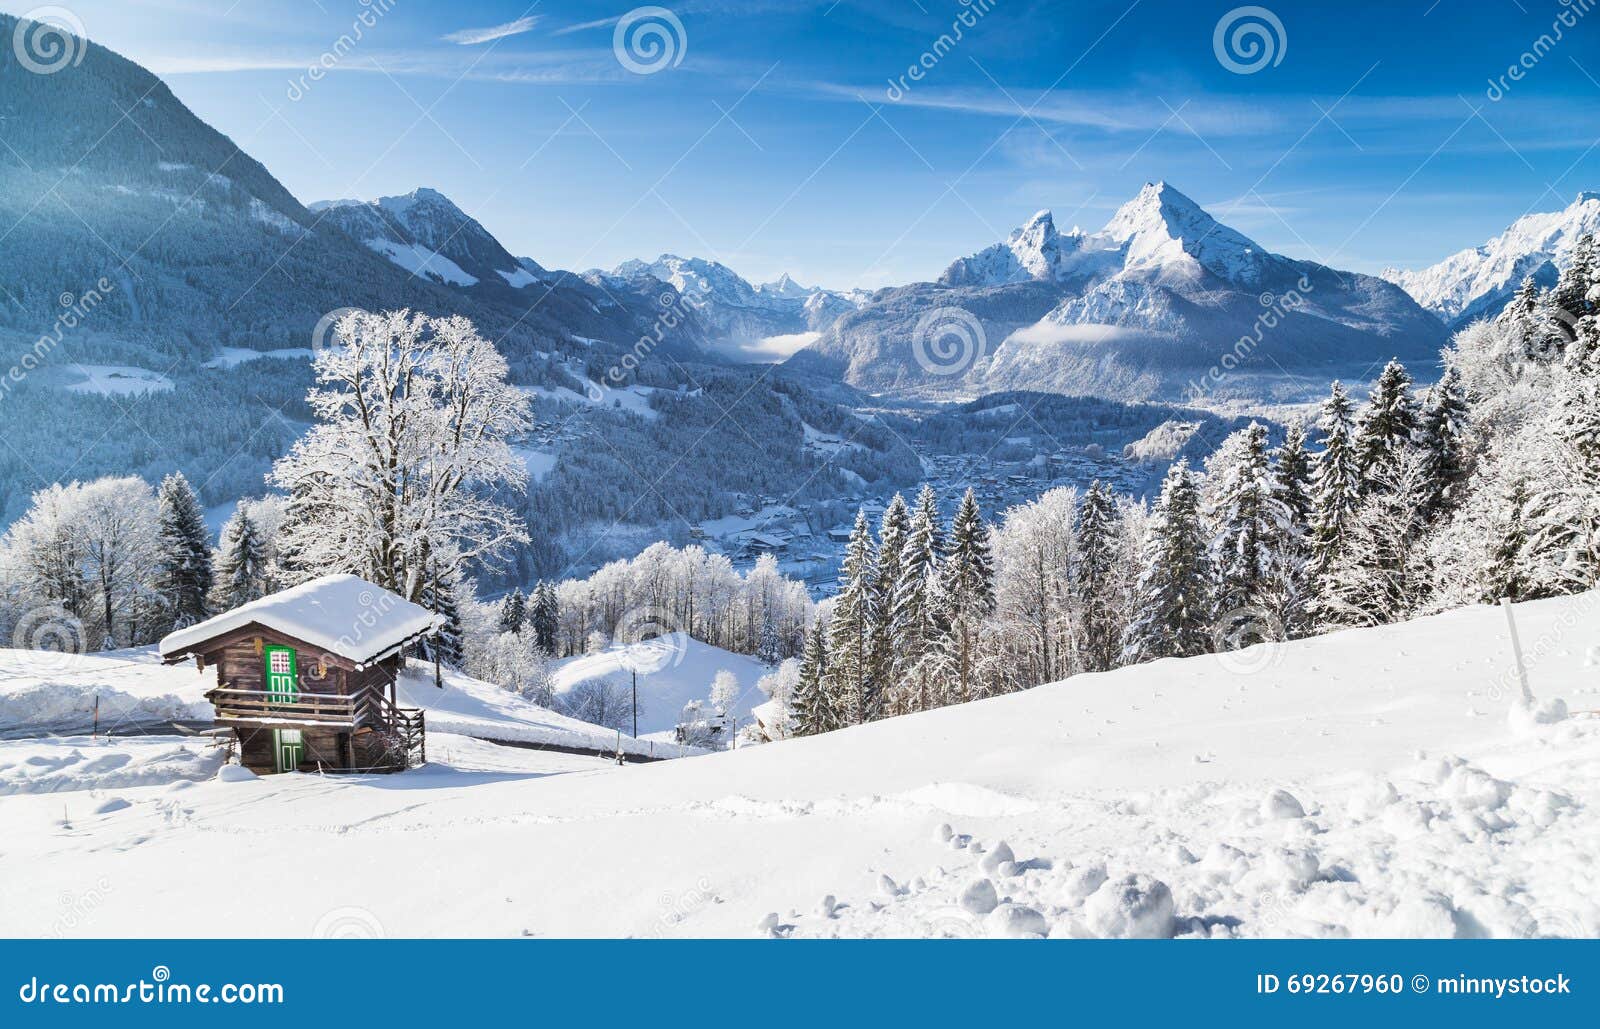 winter wonderland with mountain chalet in the alps